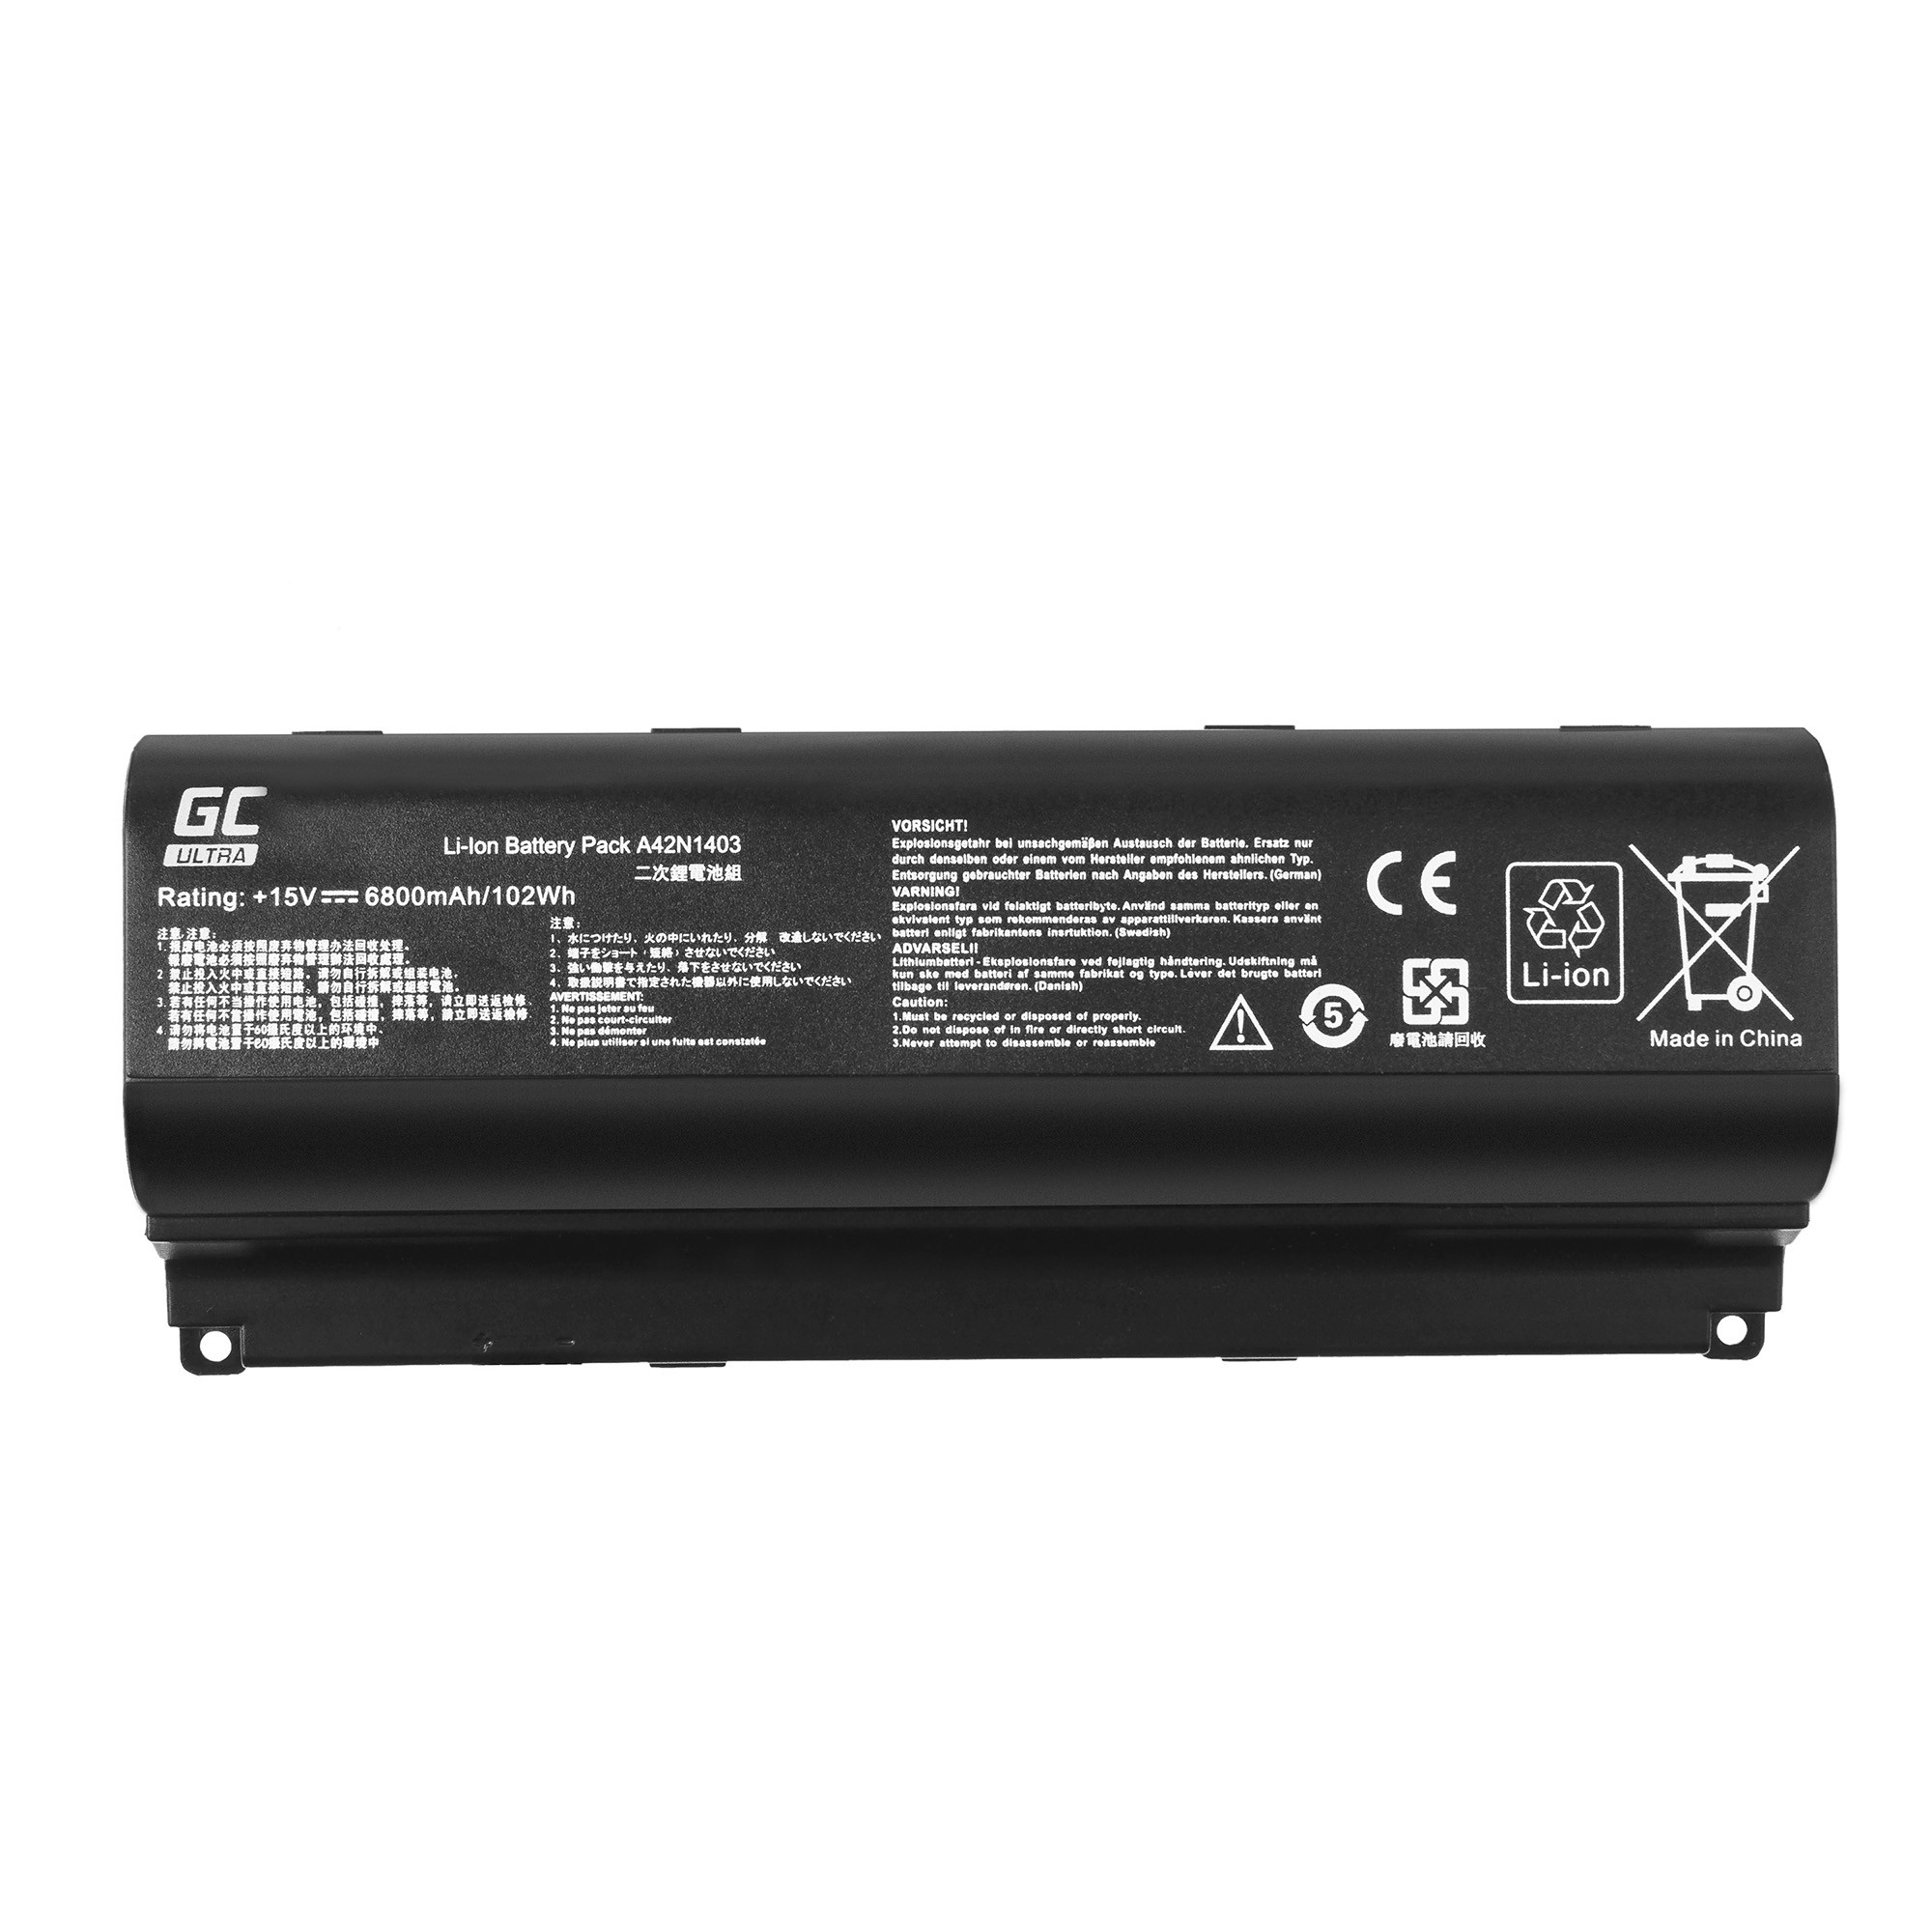 Green Cell AS128ULTRA Baterie Asus A42N1403, Asus ROG G751 G751J G751JL G751JM G751JT G751JY 6800mAh Li-ion